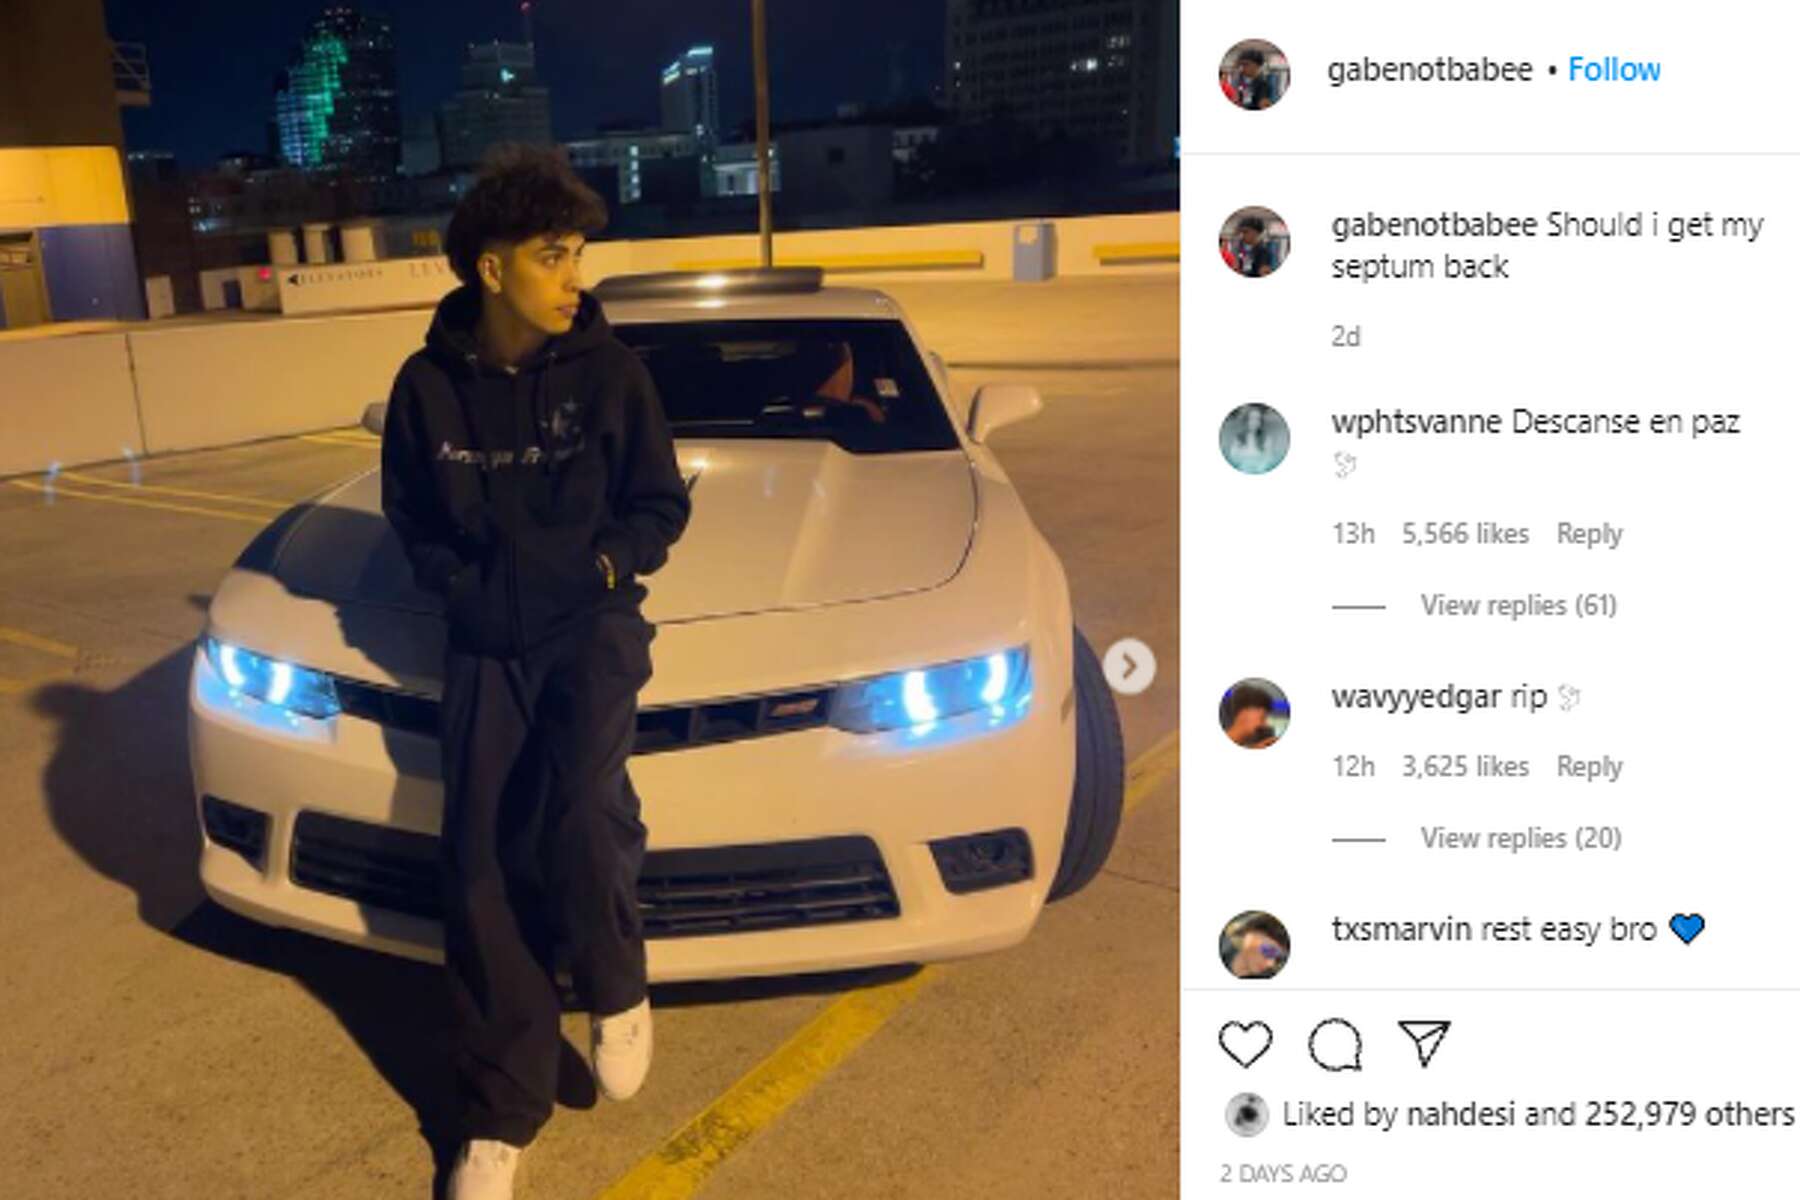 Texas Tiktok Star Gabriel Salazar Died In A Car Accident Friends And Family Say